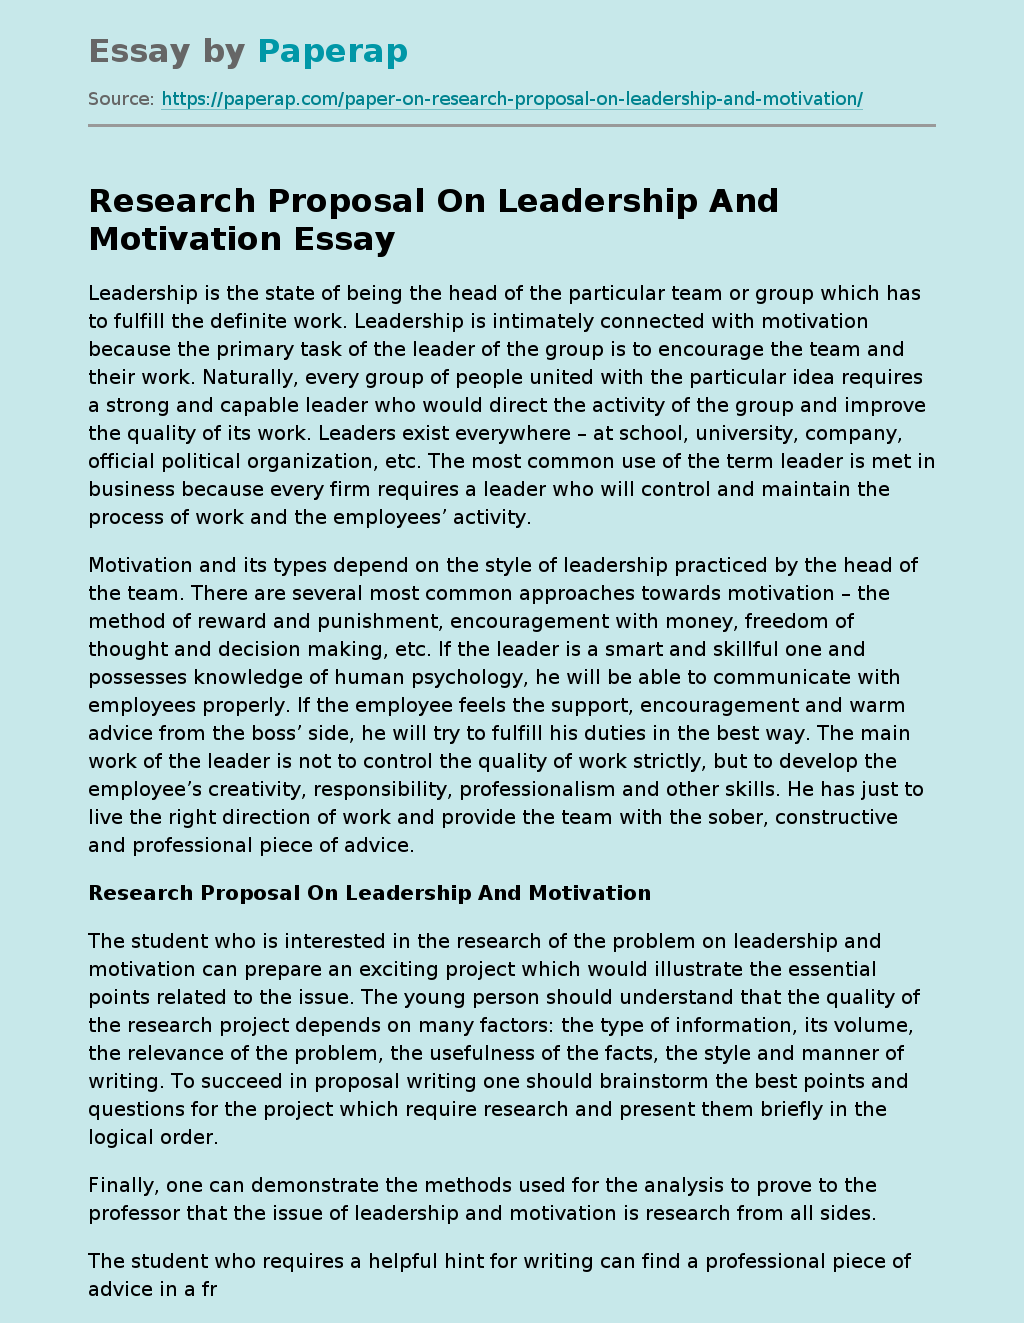 Research Proposal On Leadership And Motivation